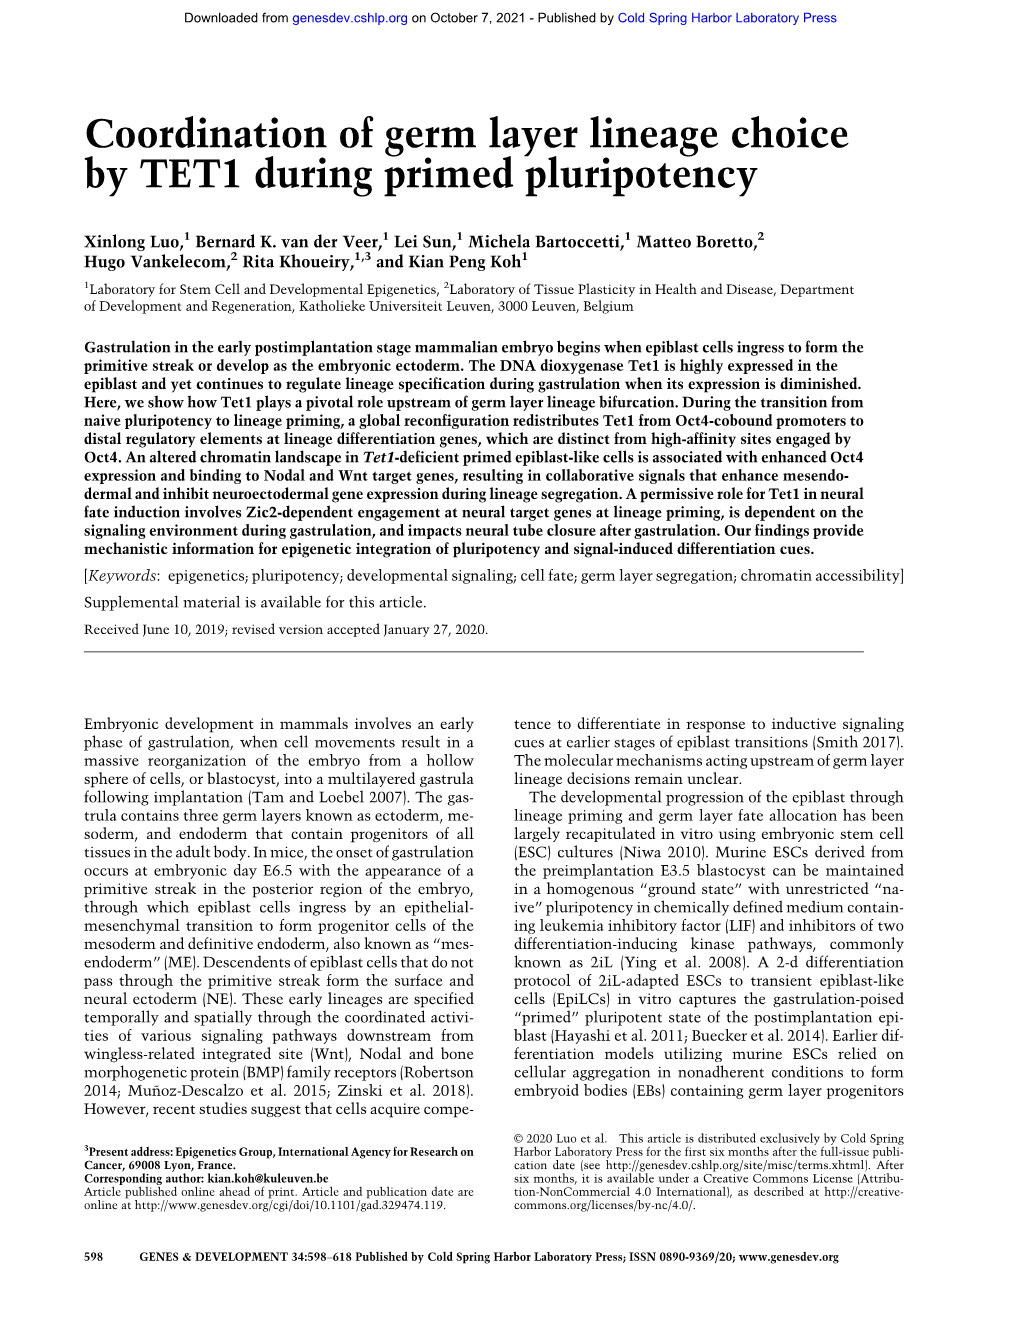 Coordination of Germ Layer Lineage Choice by TET1 During Primed Pluripotency